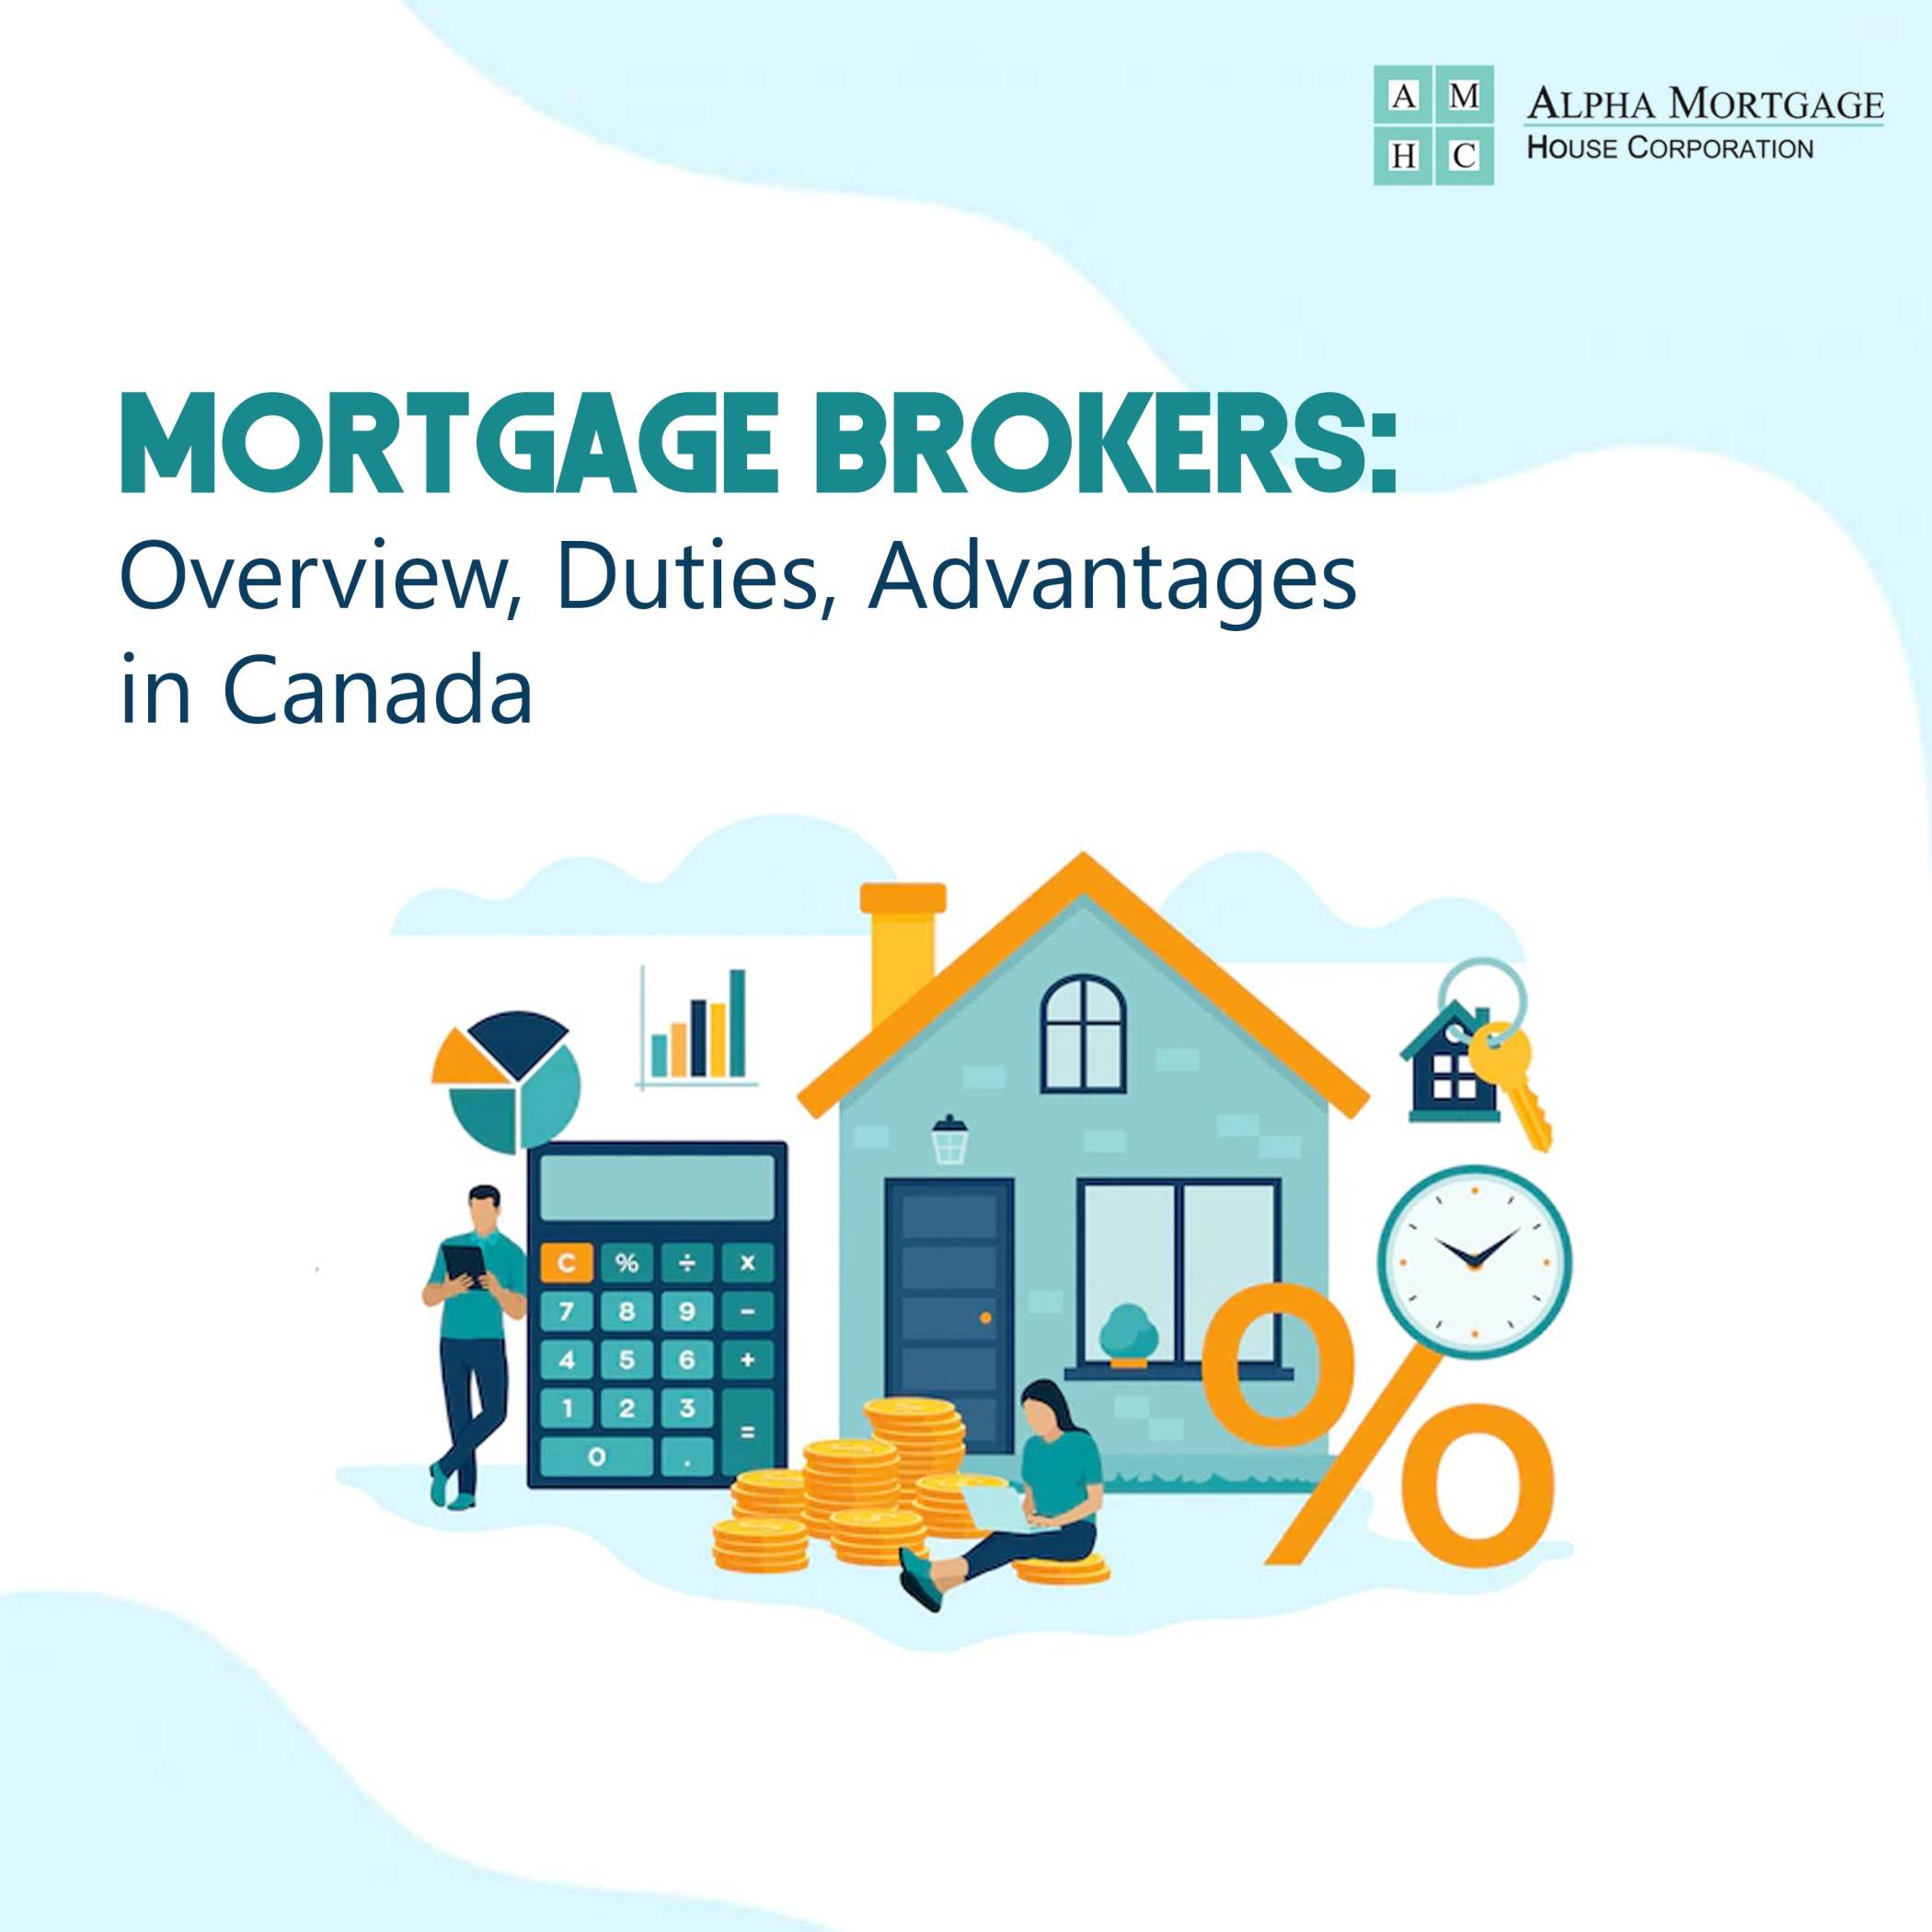 Mortgage Brokers - Overview, Duties, Advantages in Canada